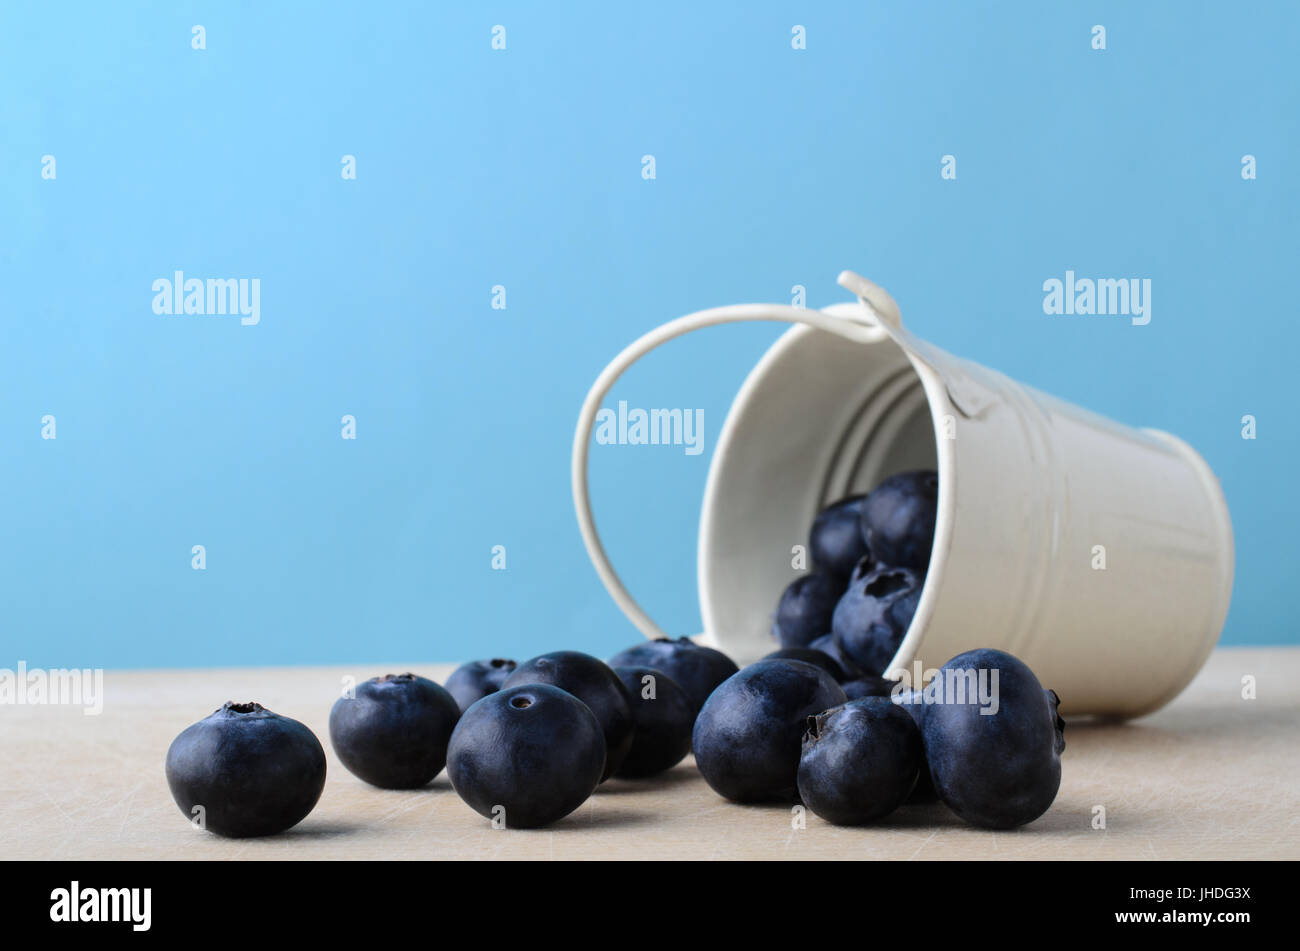 Blueberries spilling out of a cream enamel bucket that has tipped over on wood with light blue background providing copy space. Stock Photo